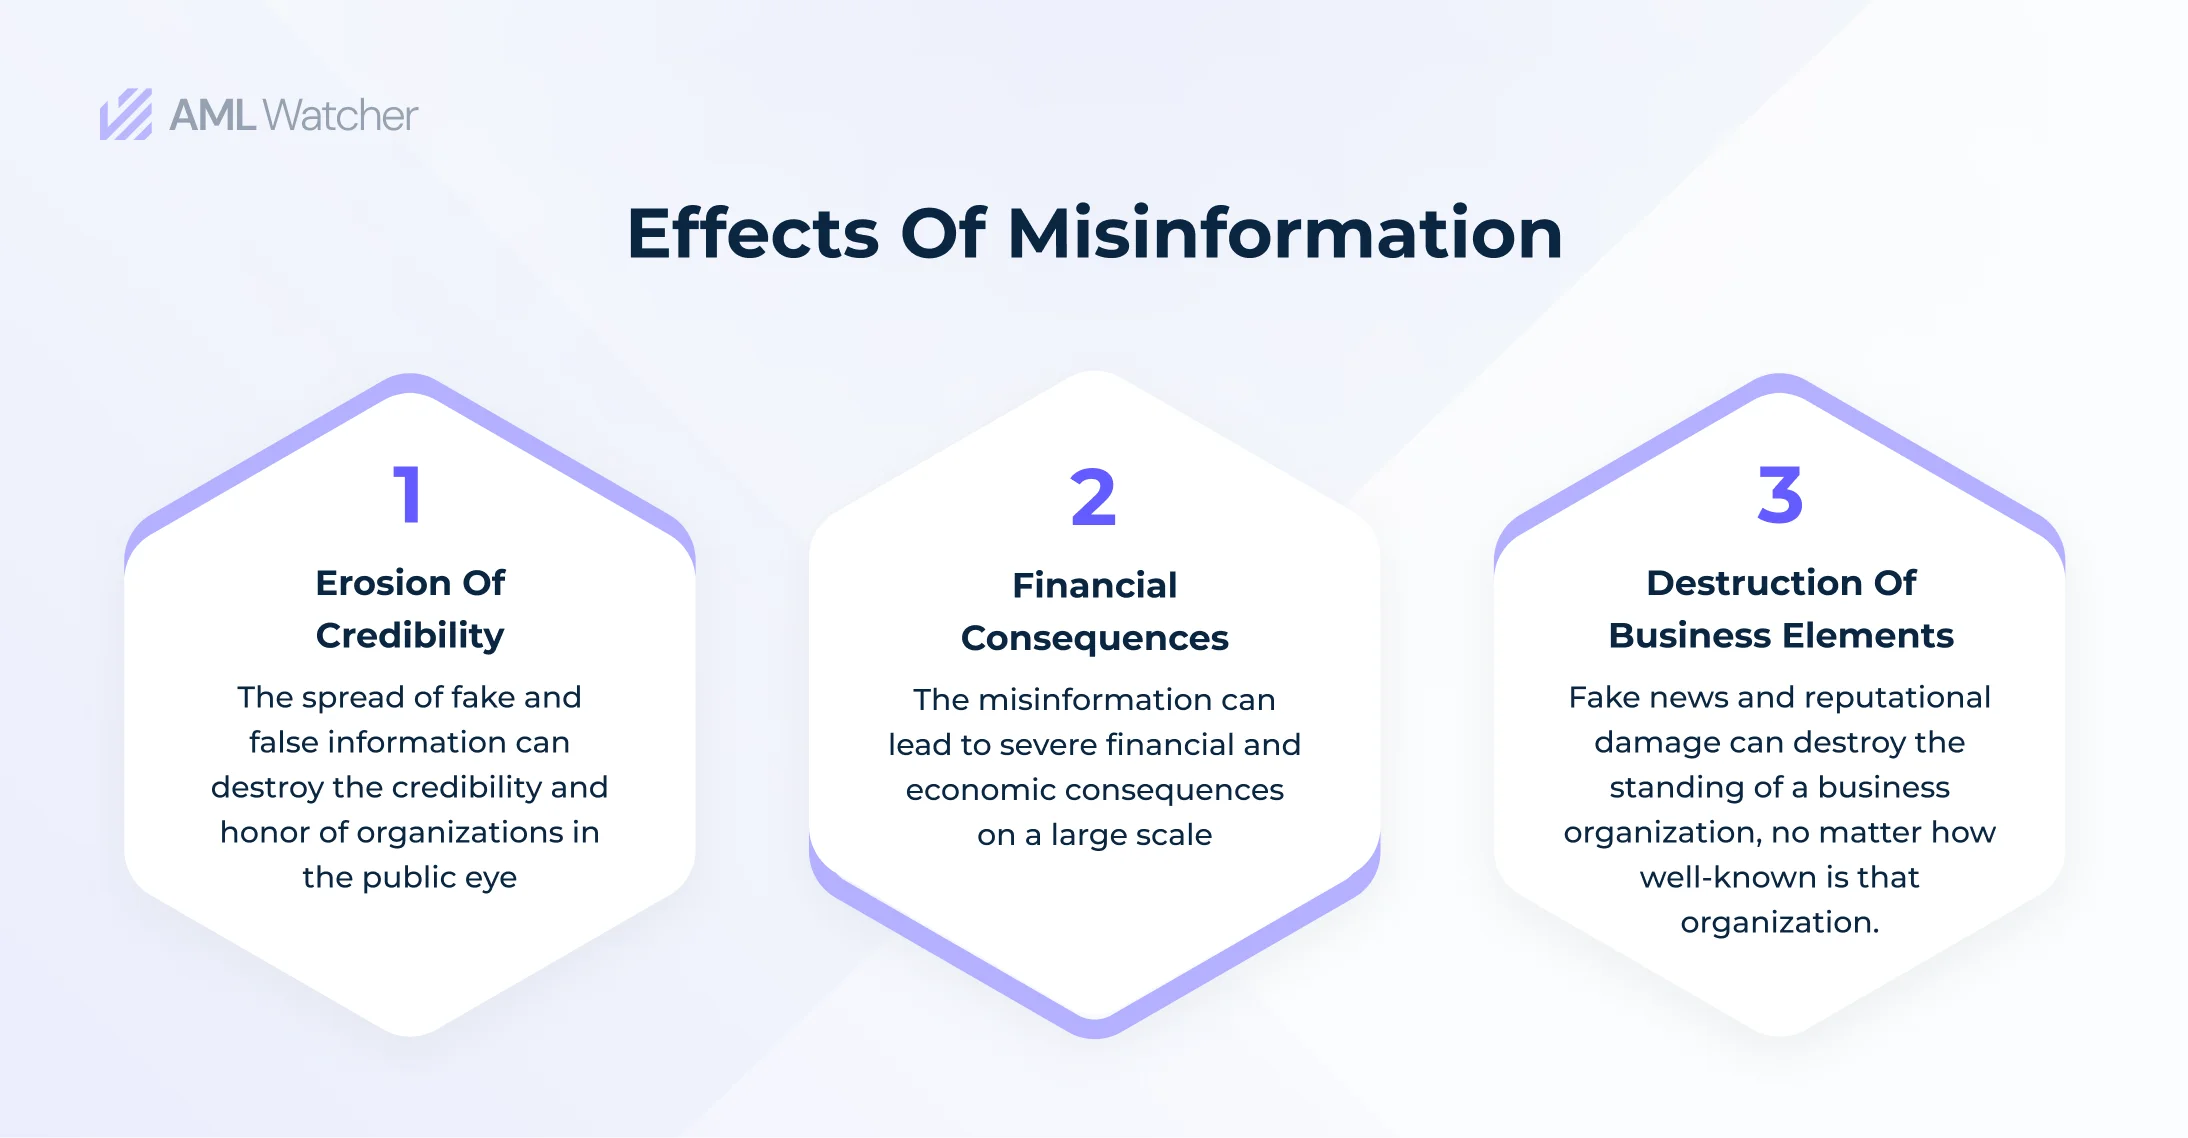 Fake and false news can lead to serious consequences for organizations.